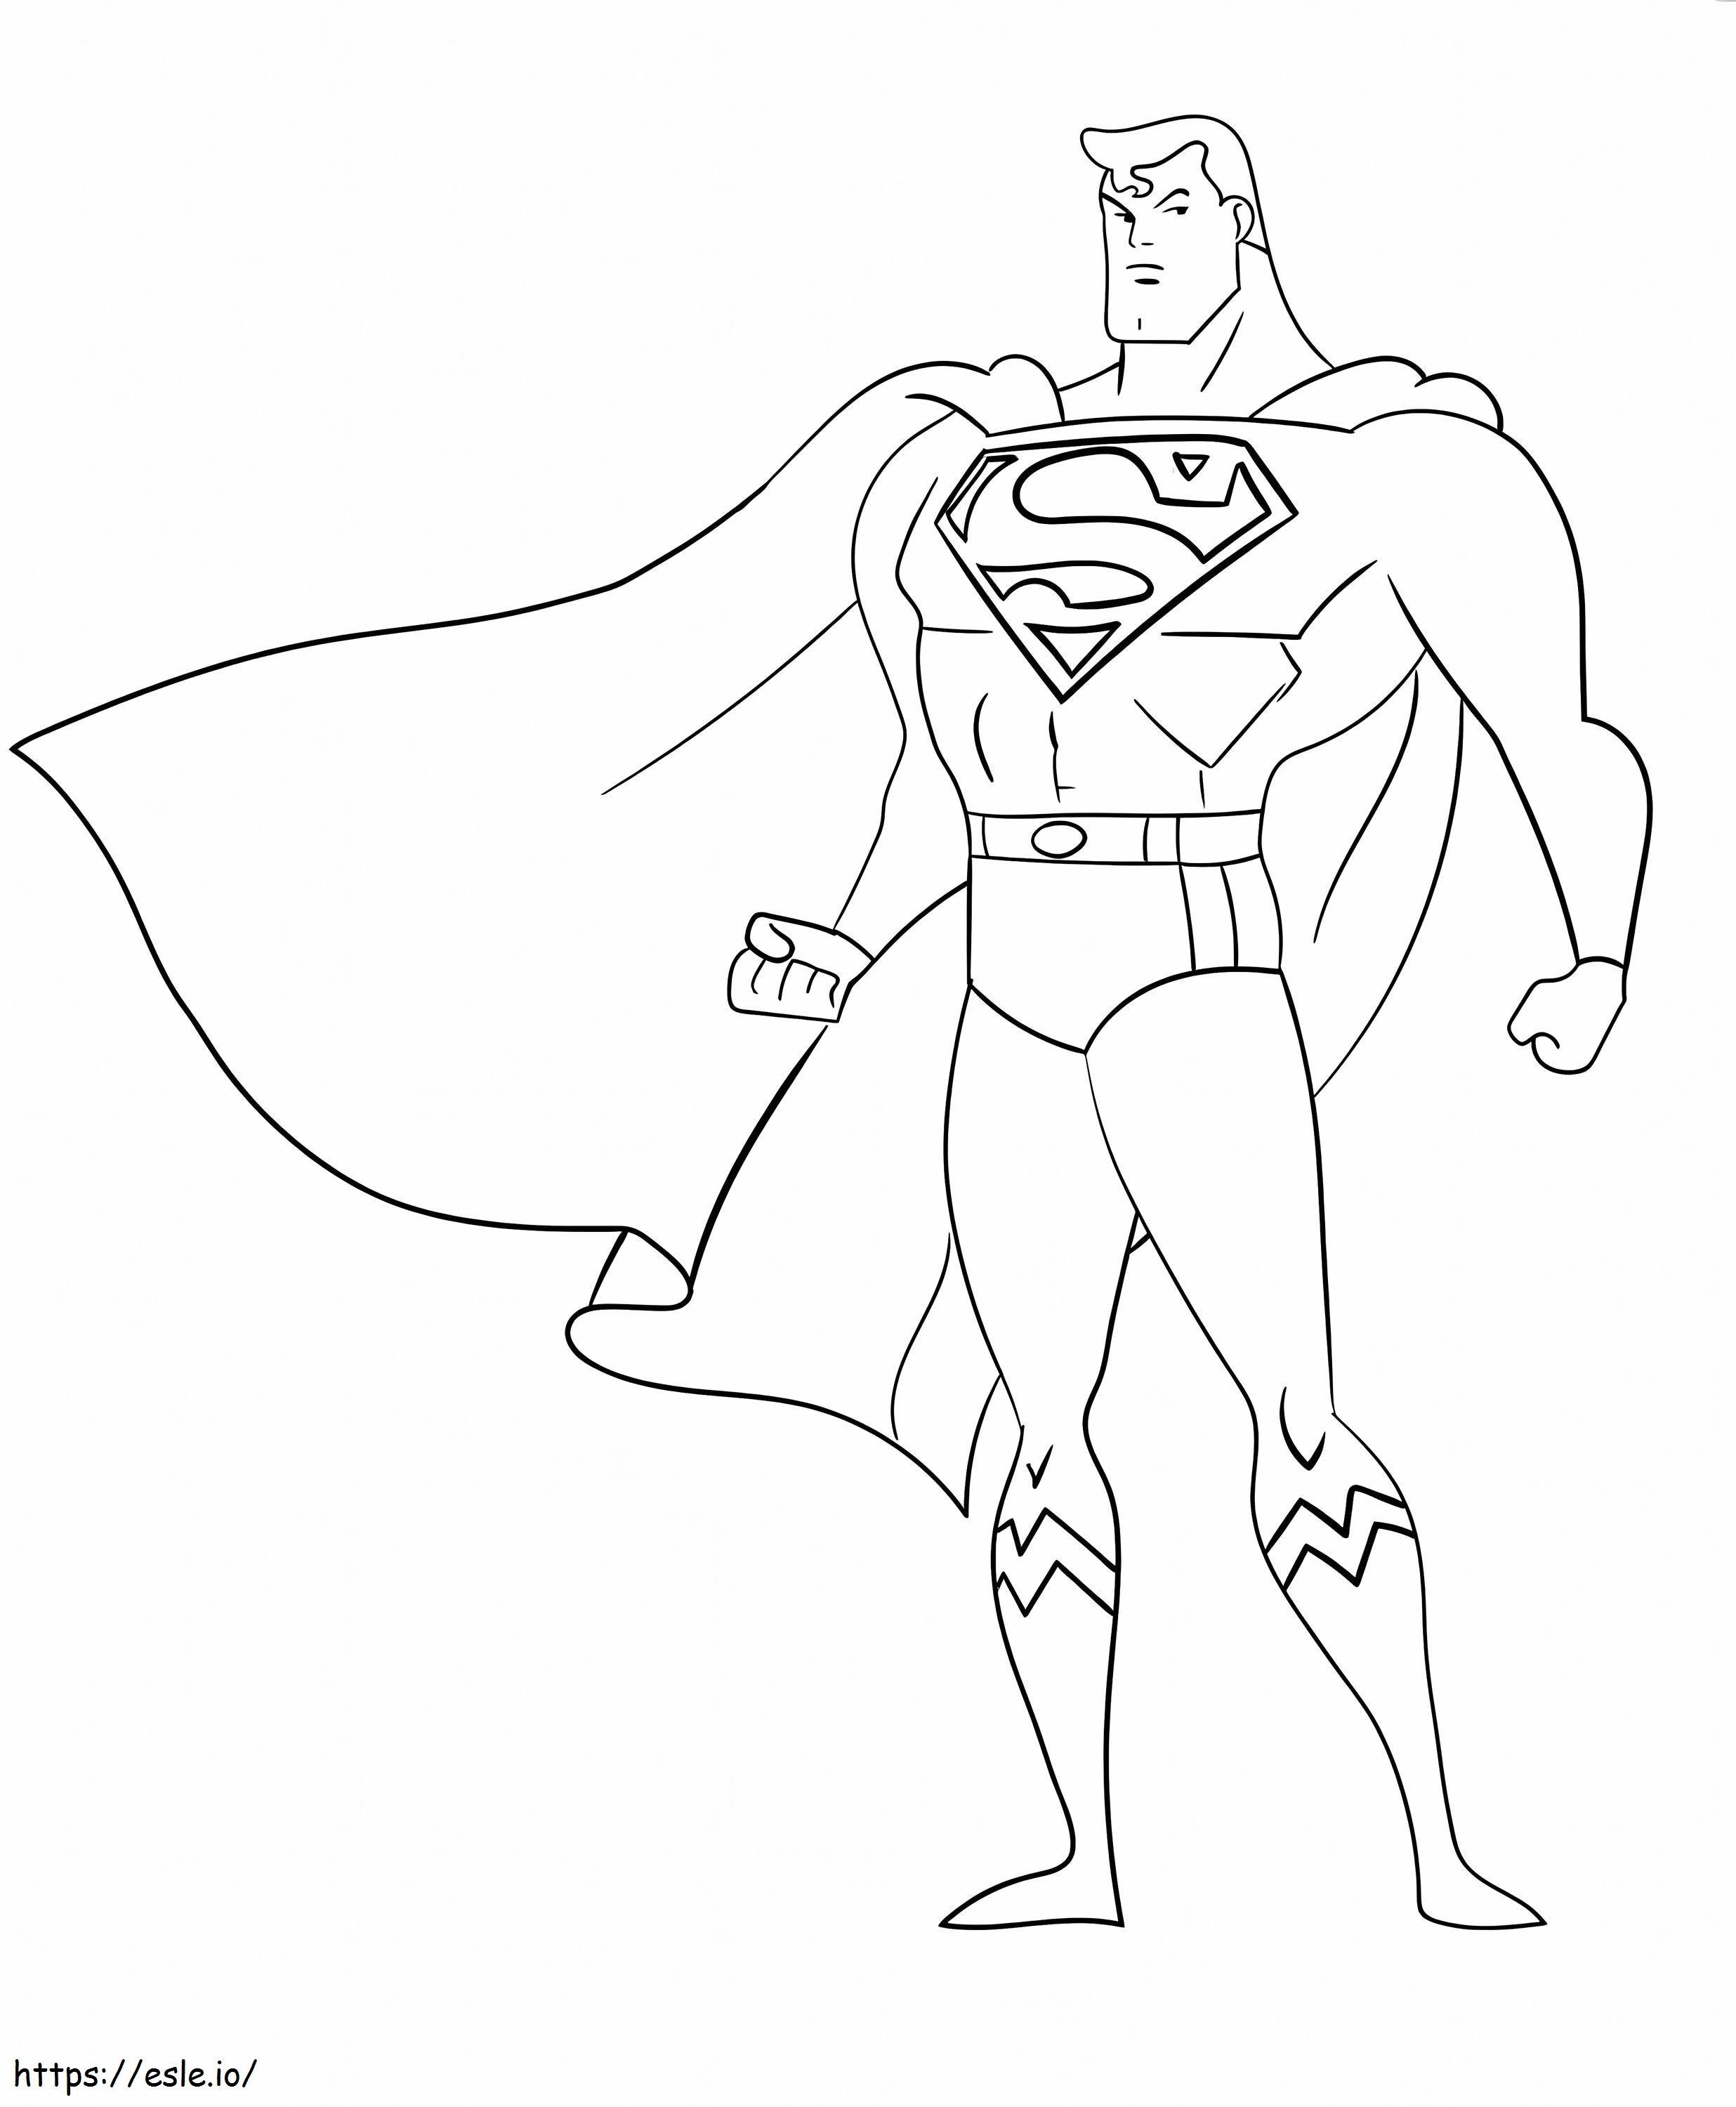 Awesome Superman coloring page